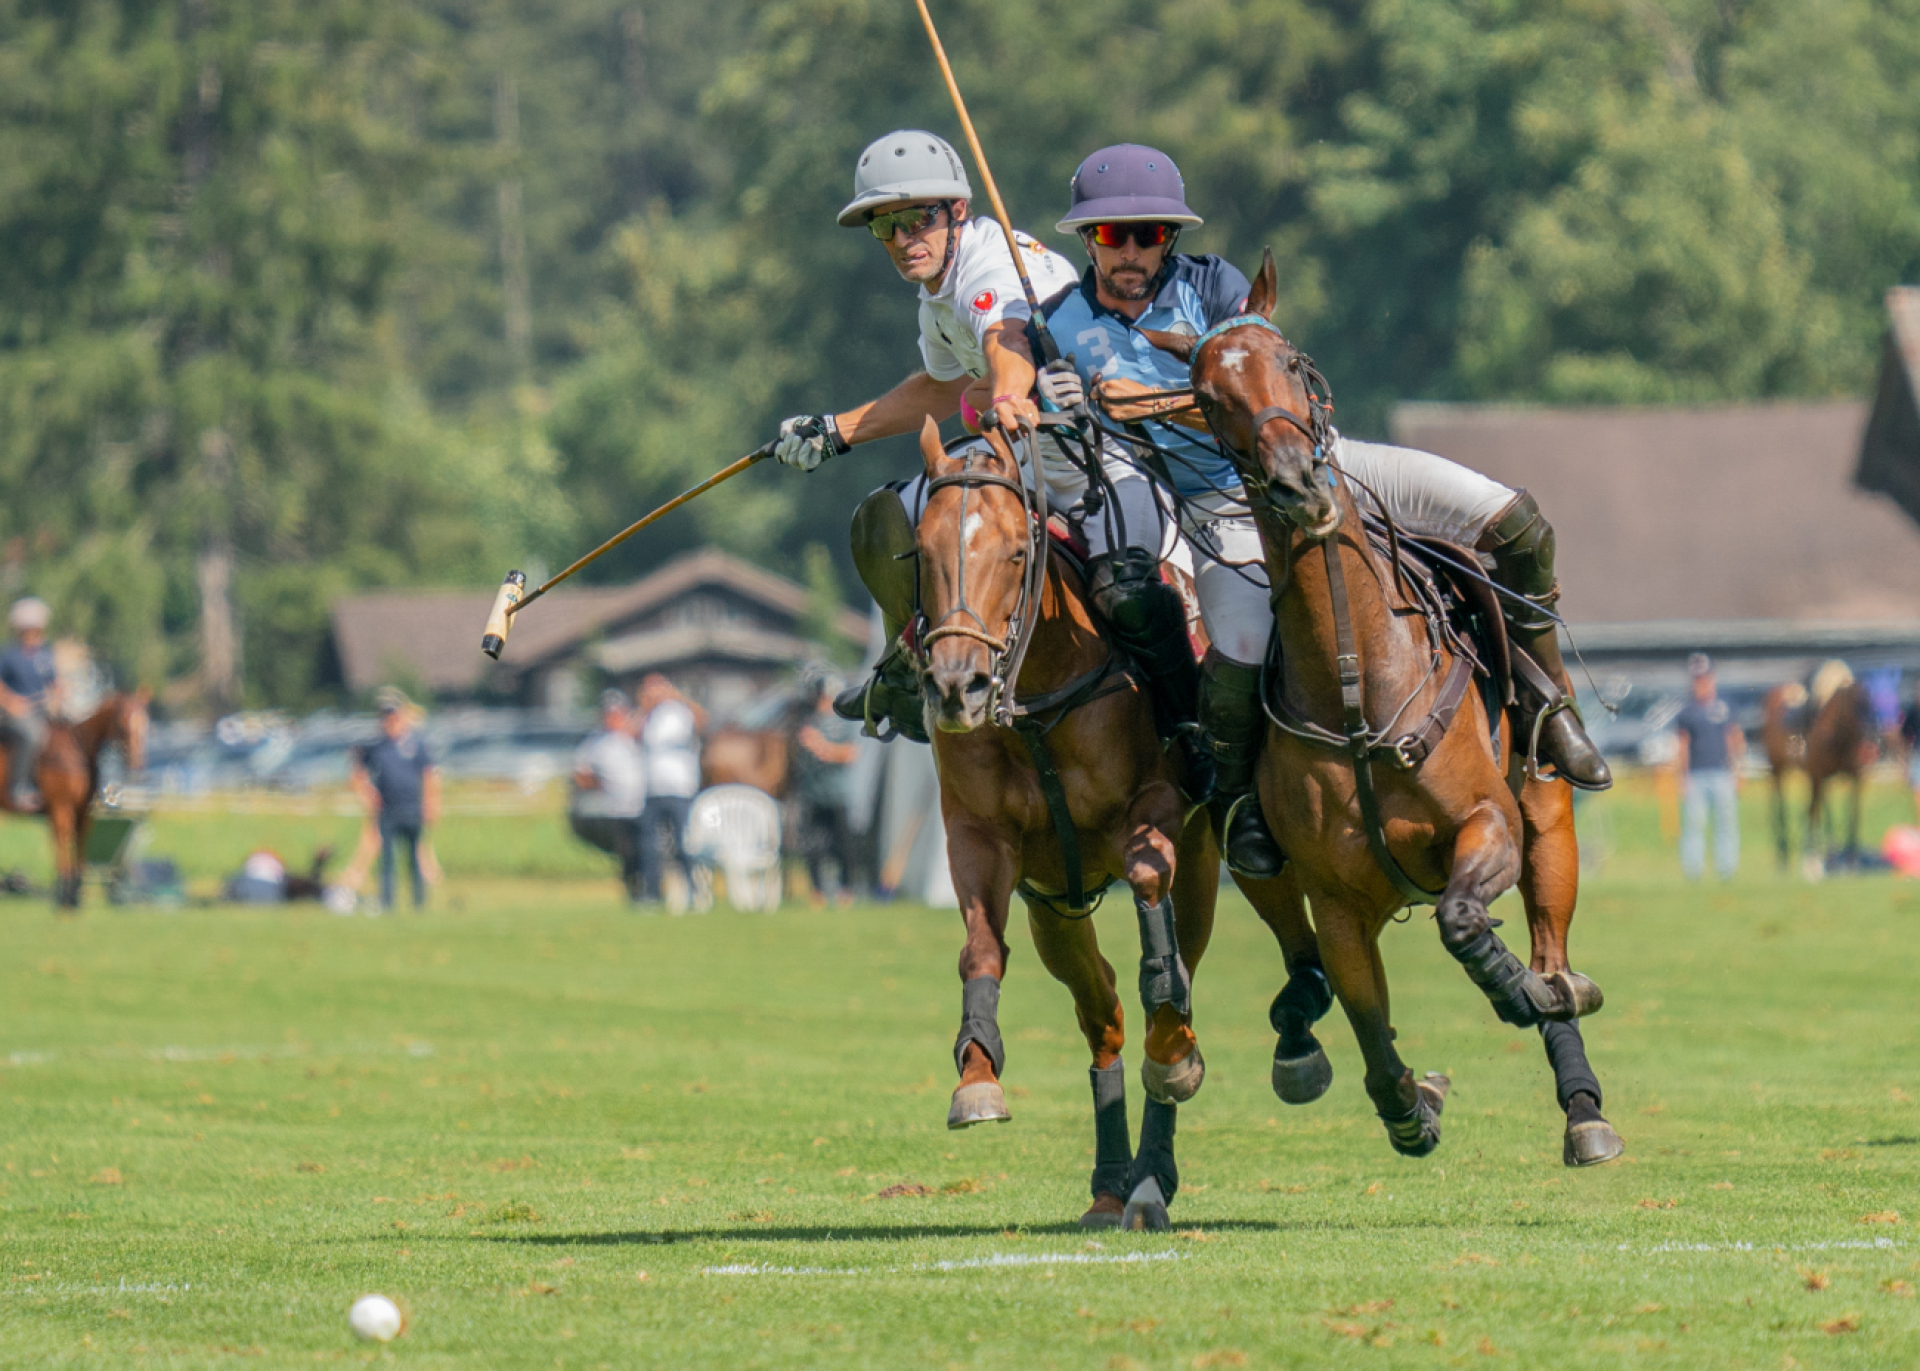 Some say polo is a contact sport | © Pascal Renauldon